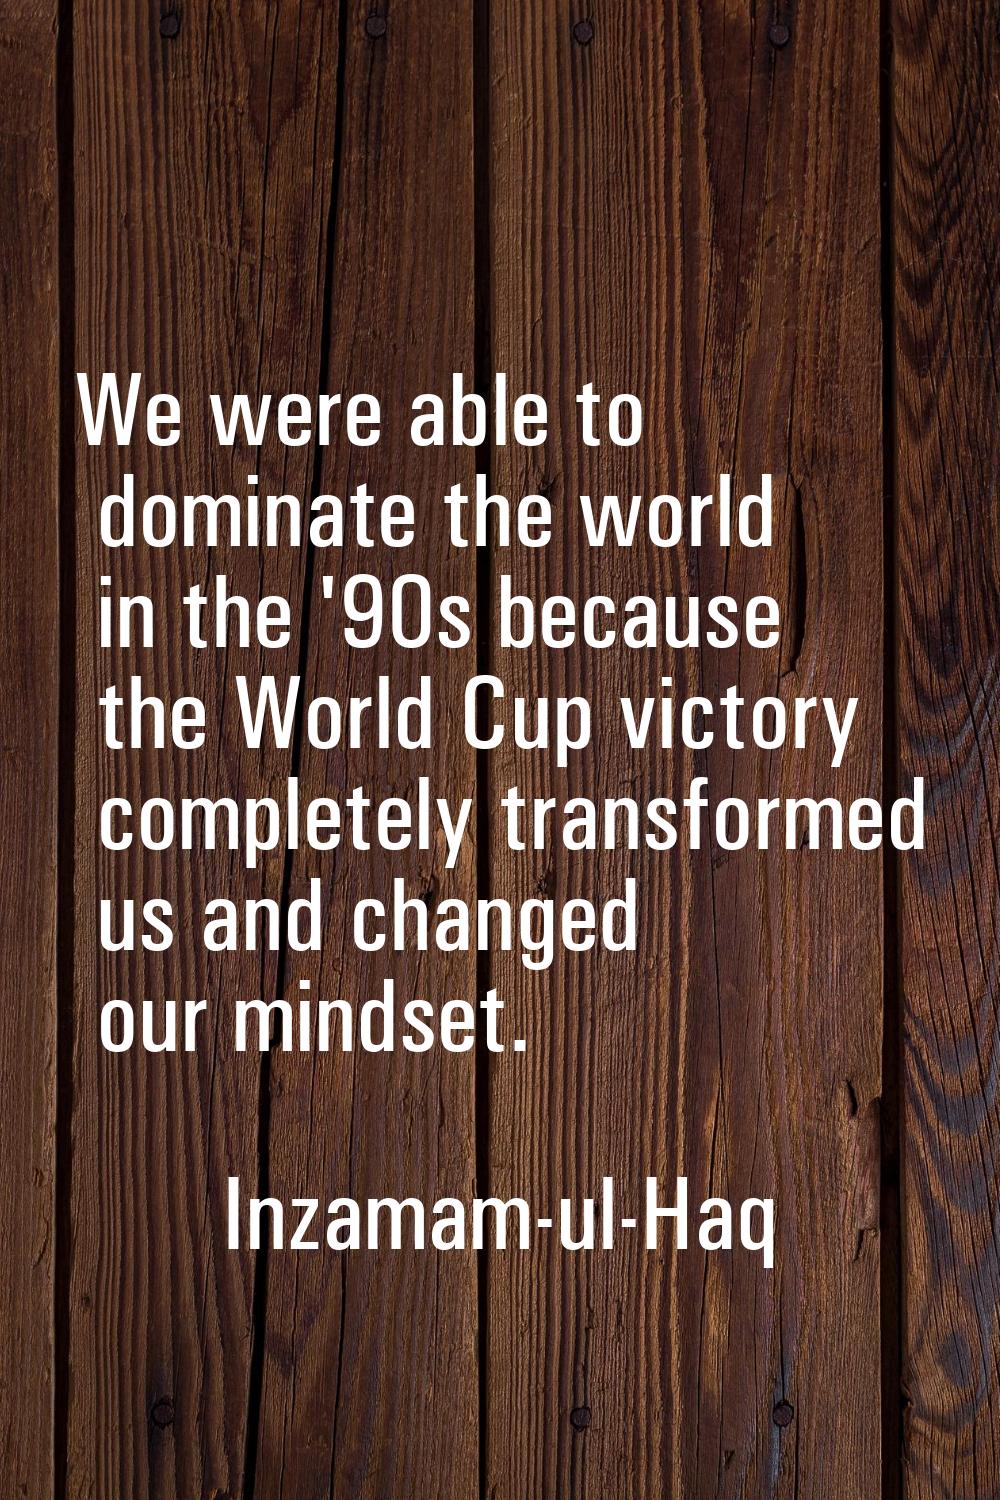 We were able to dominate the world in the '90s because the World Cup victory completely transformed